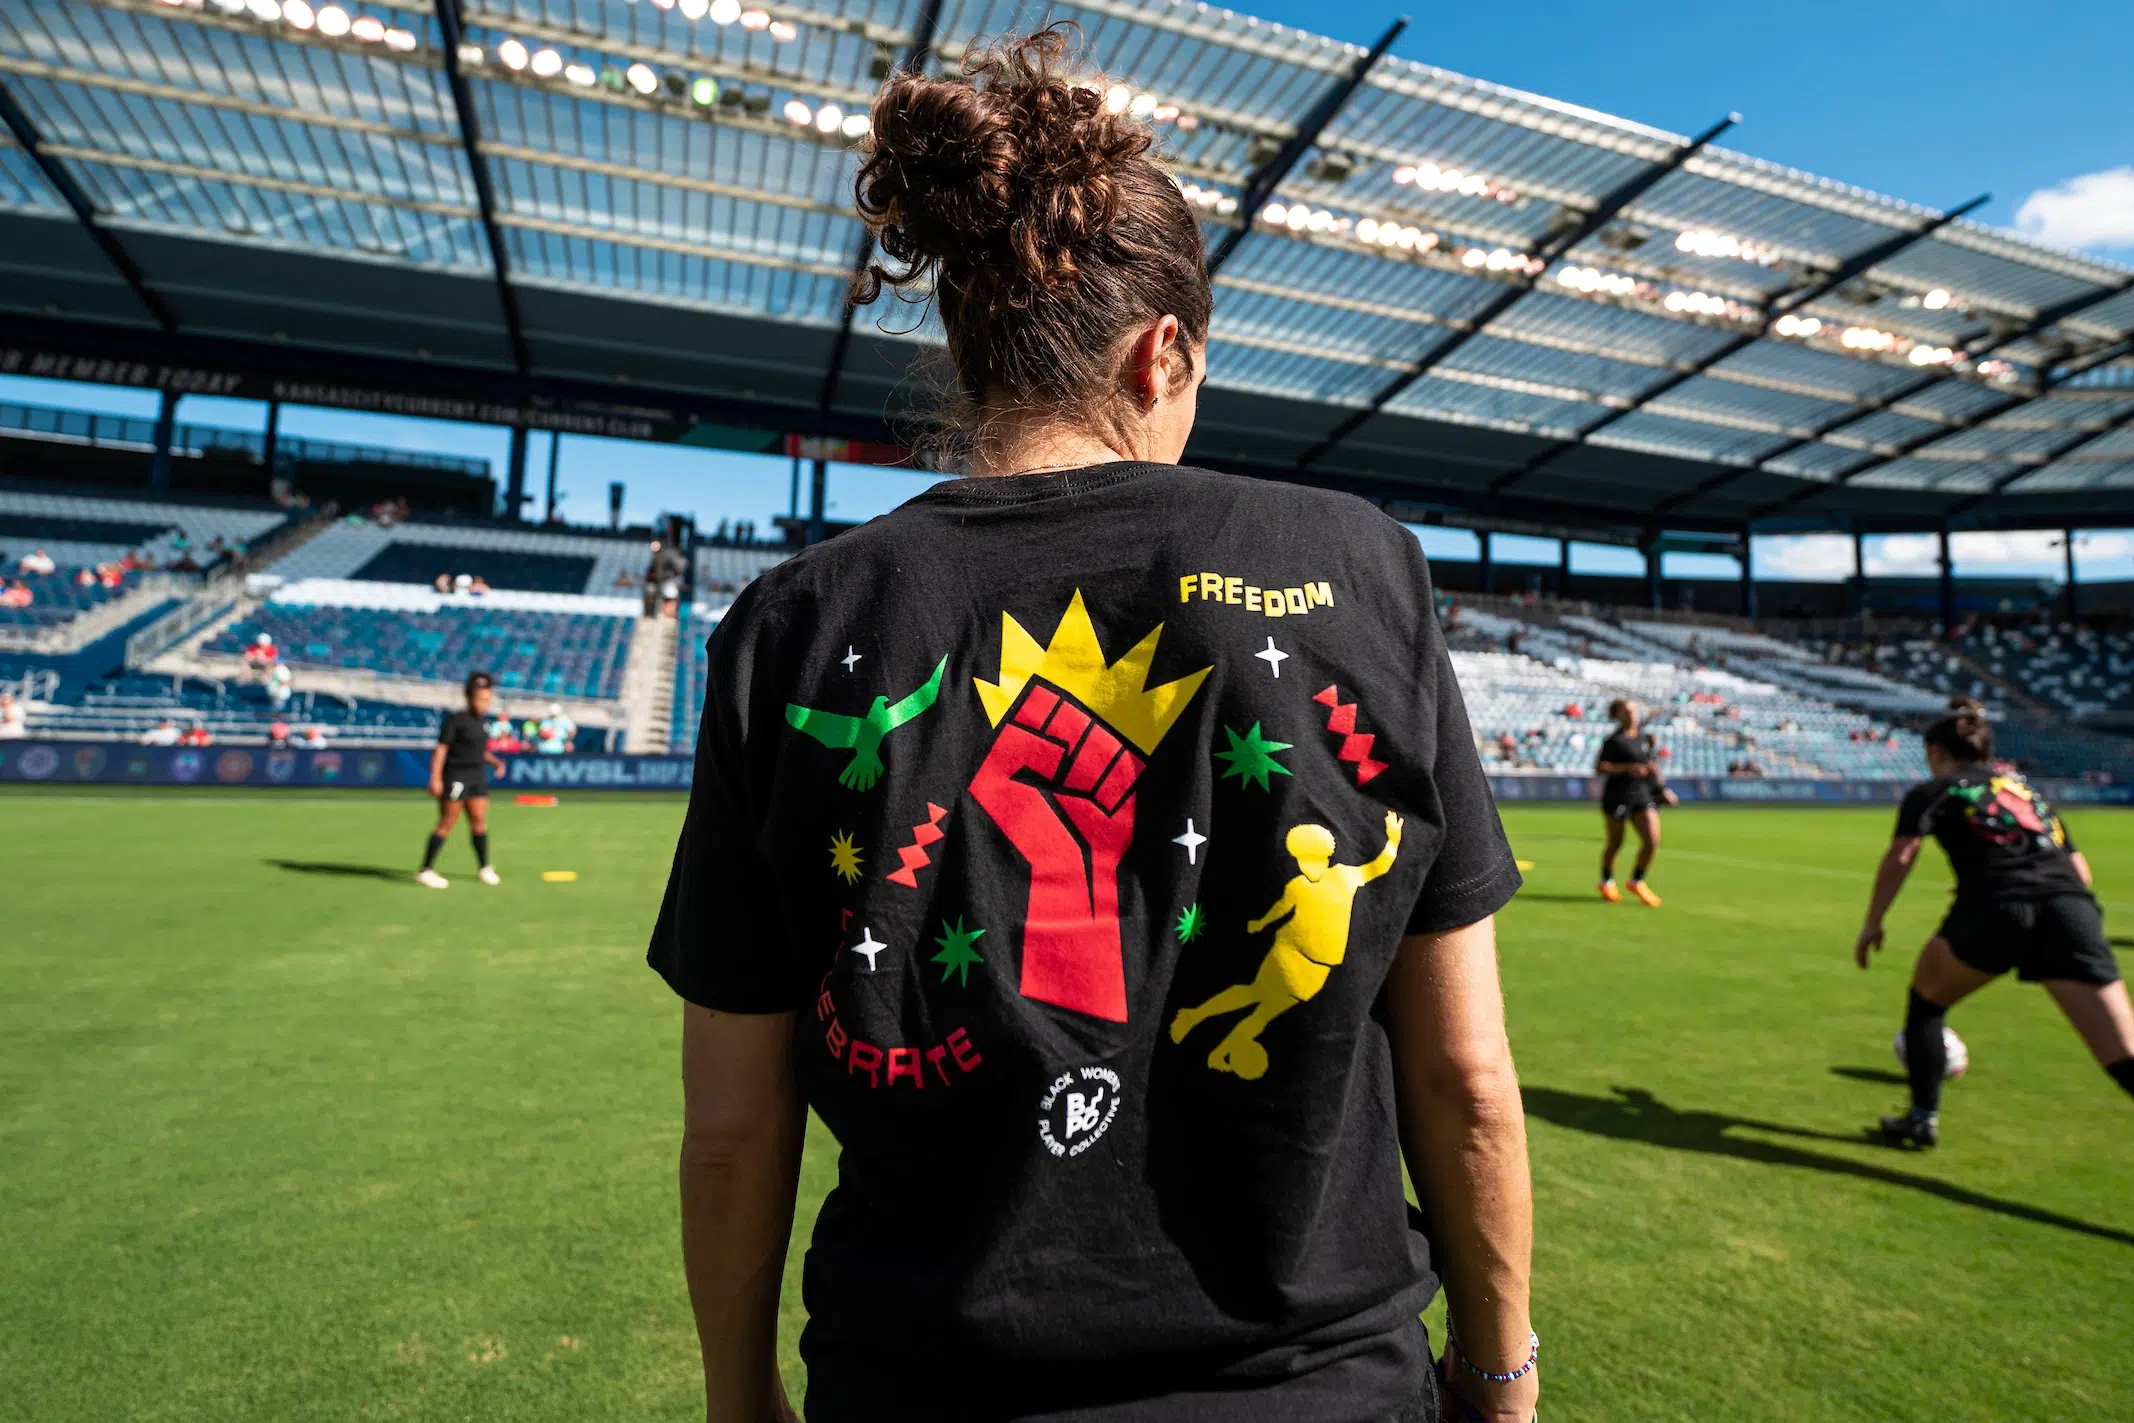 The back of a black t-shirt featuring a red fist with a gold crown, a yellow silhouette of a soccer player and the word FREEDOM.